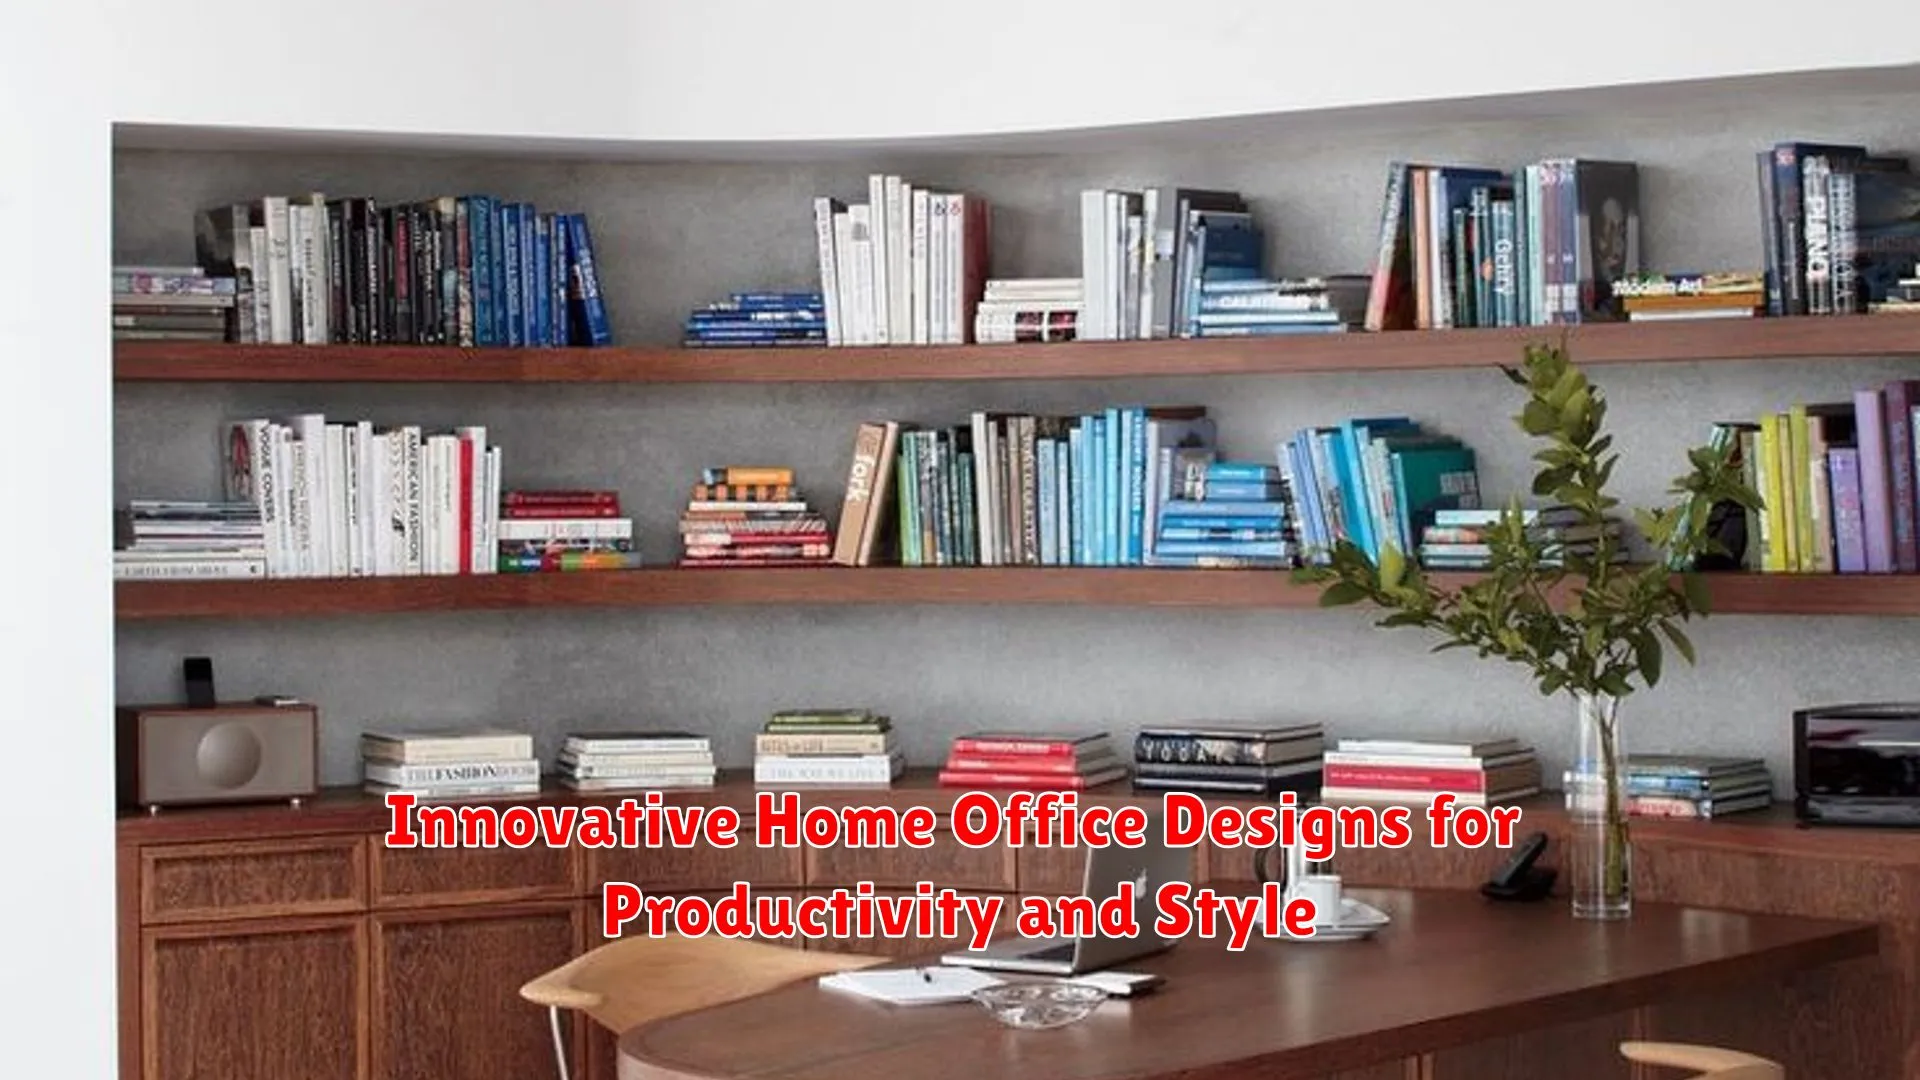 Innovative Home Office Designs for Productivity and Style